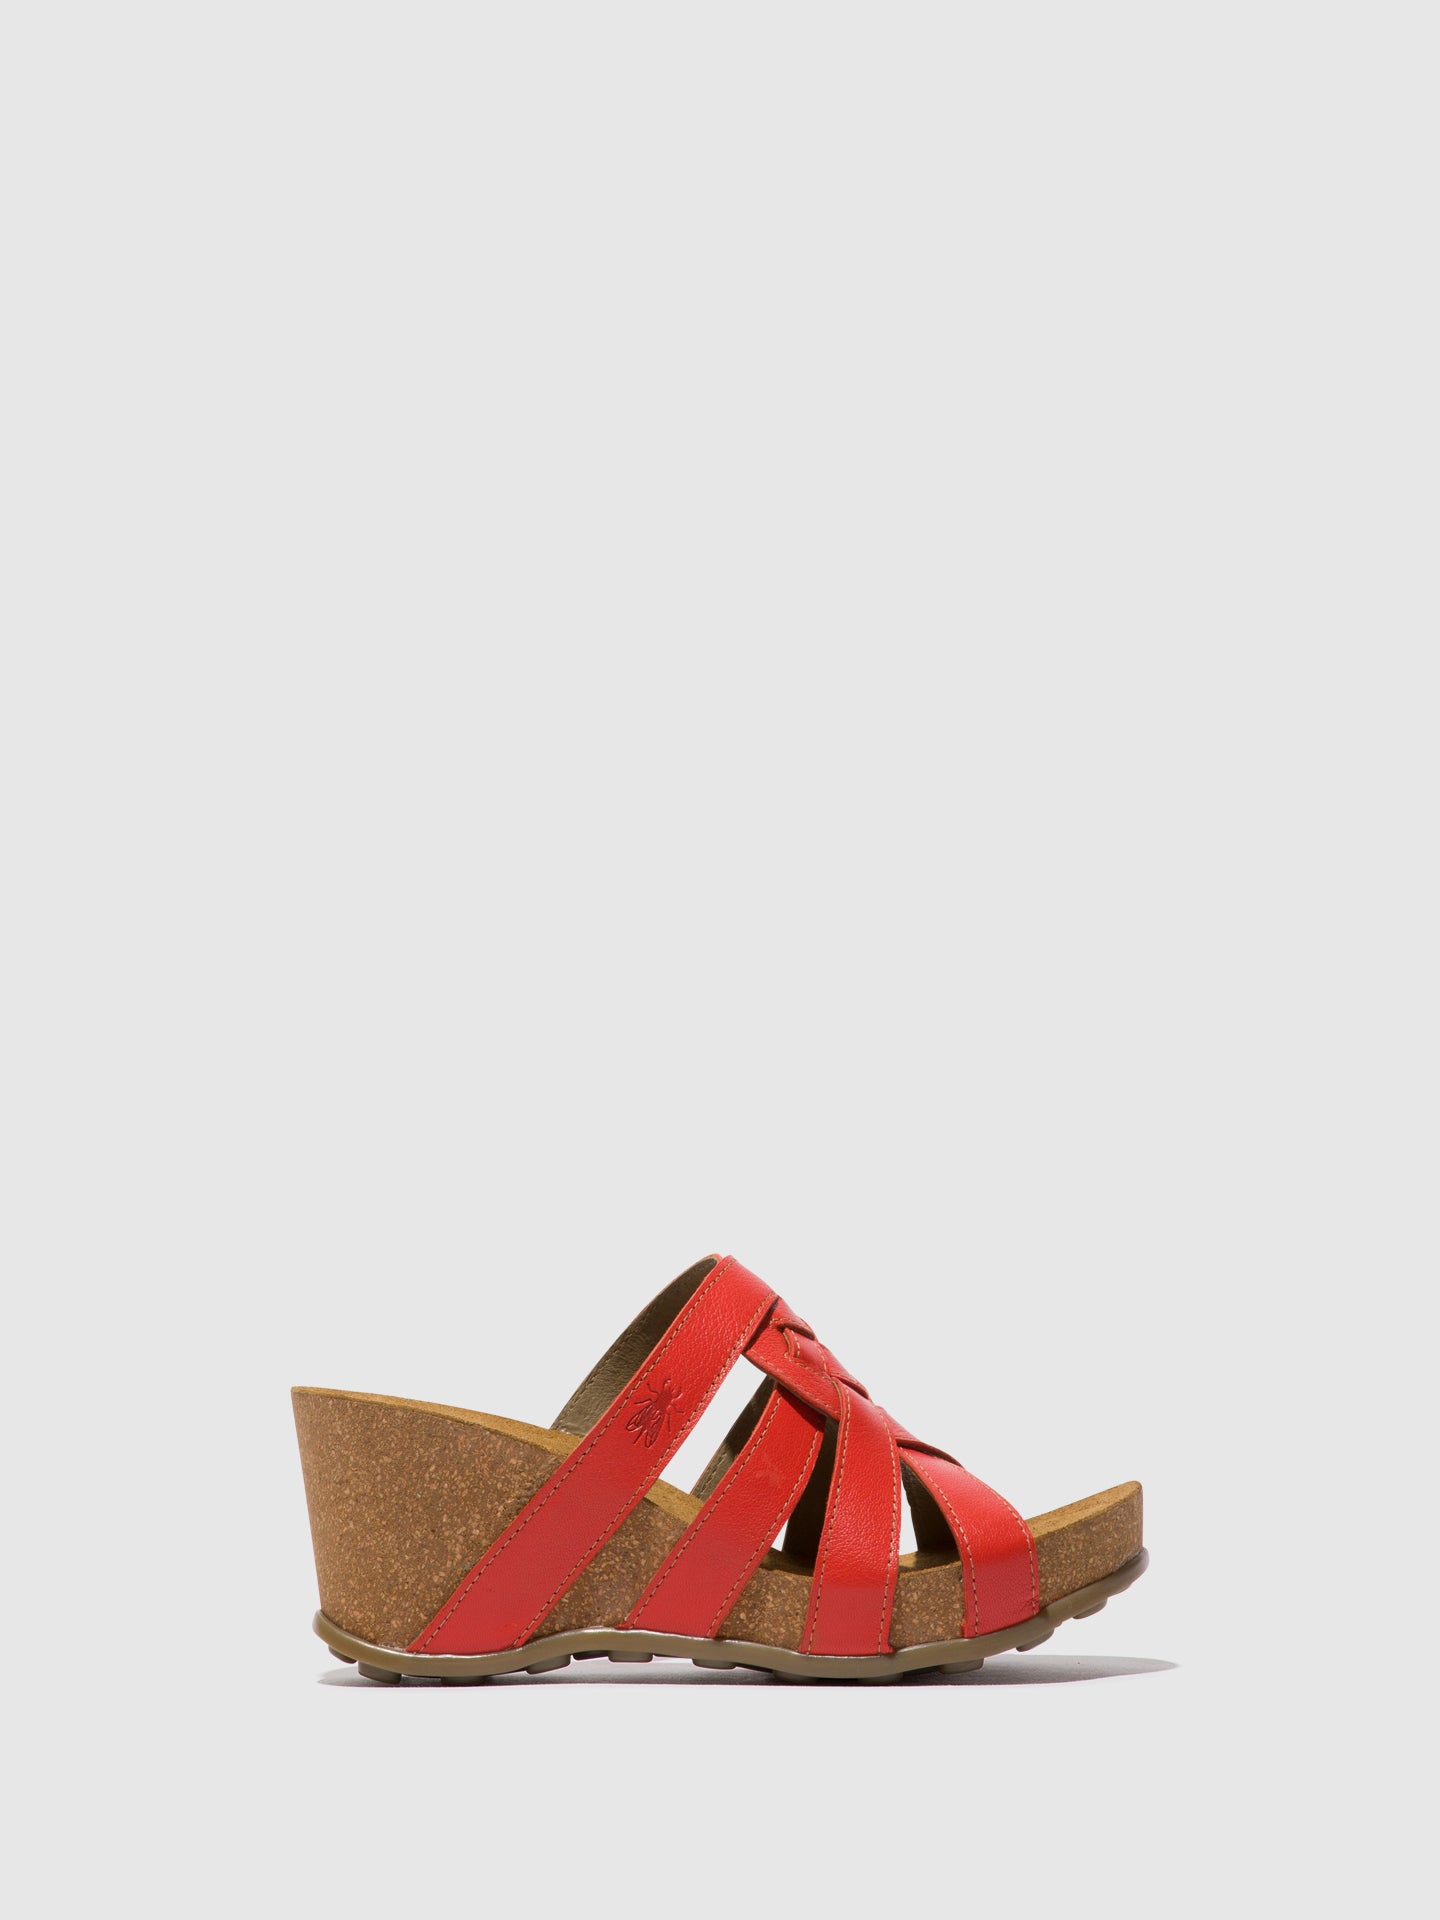 Fly London Strappy Mules GILY774LY DEVIL RED